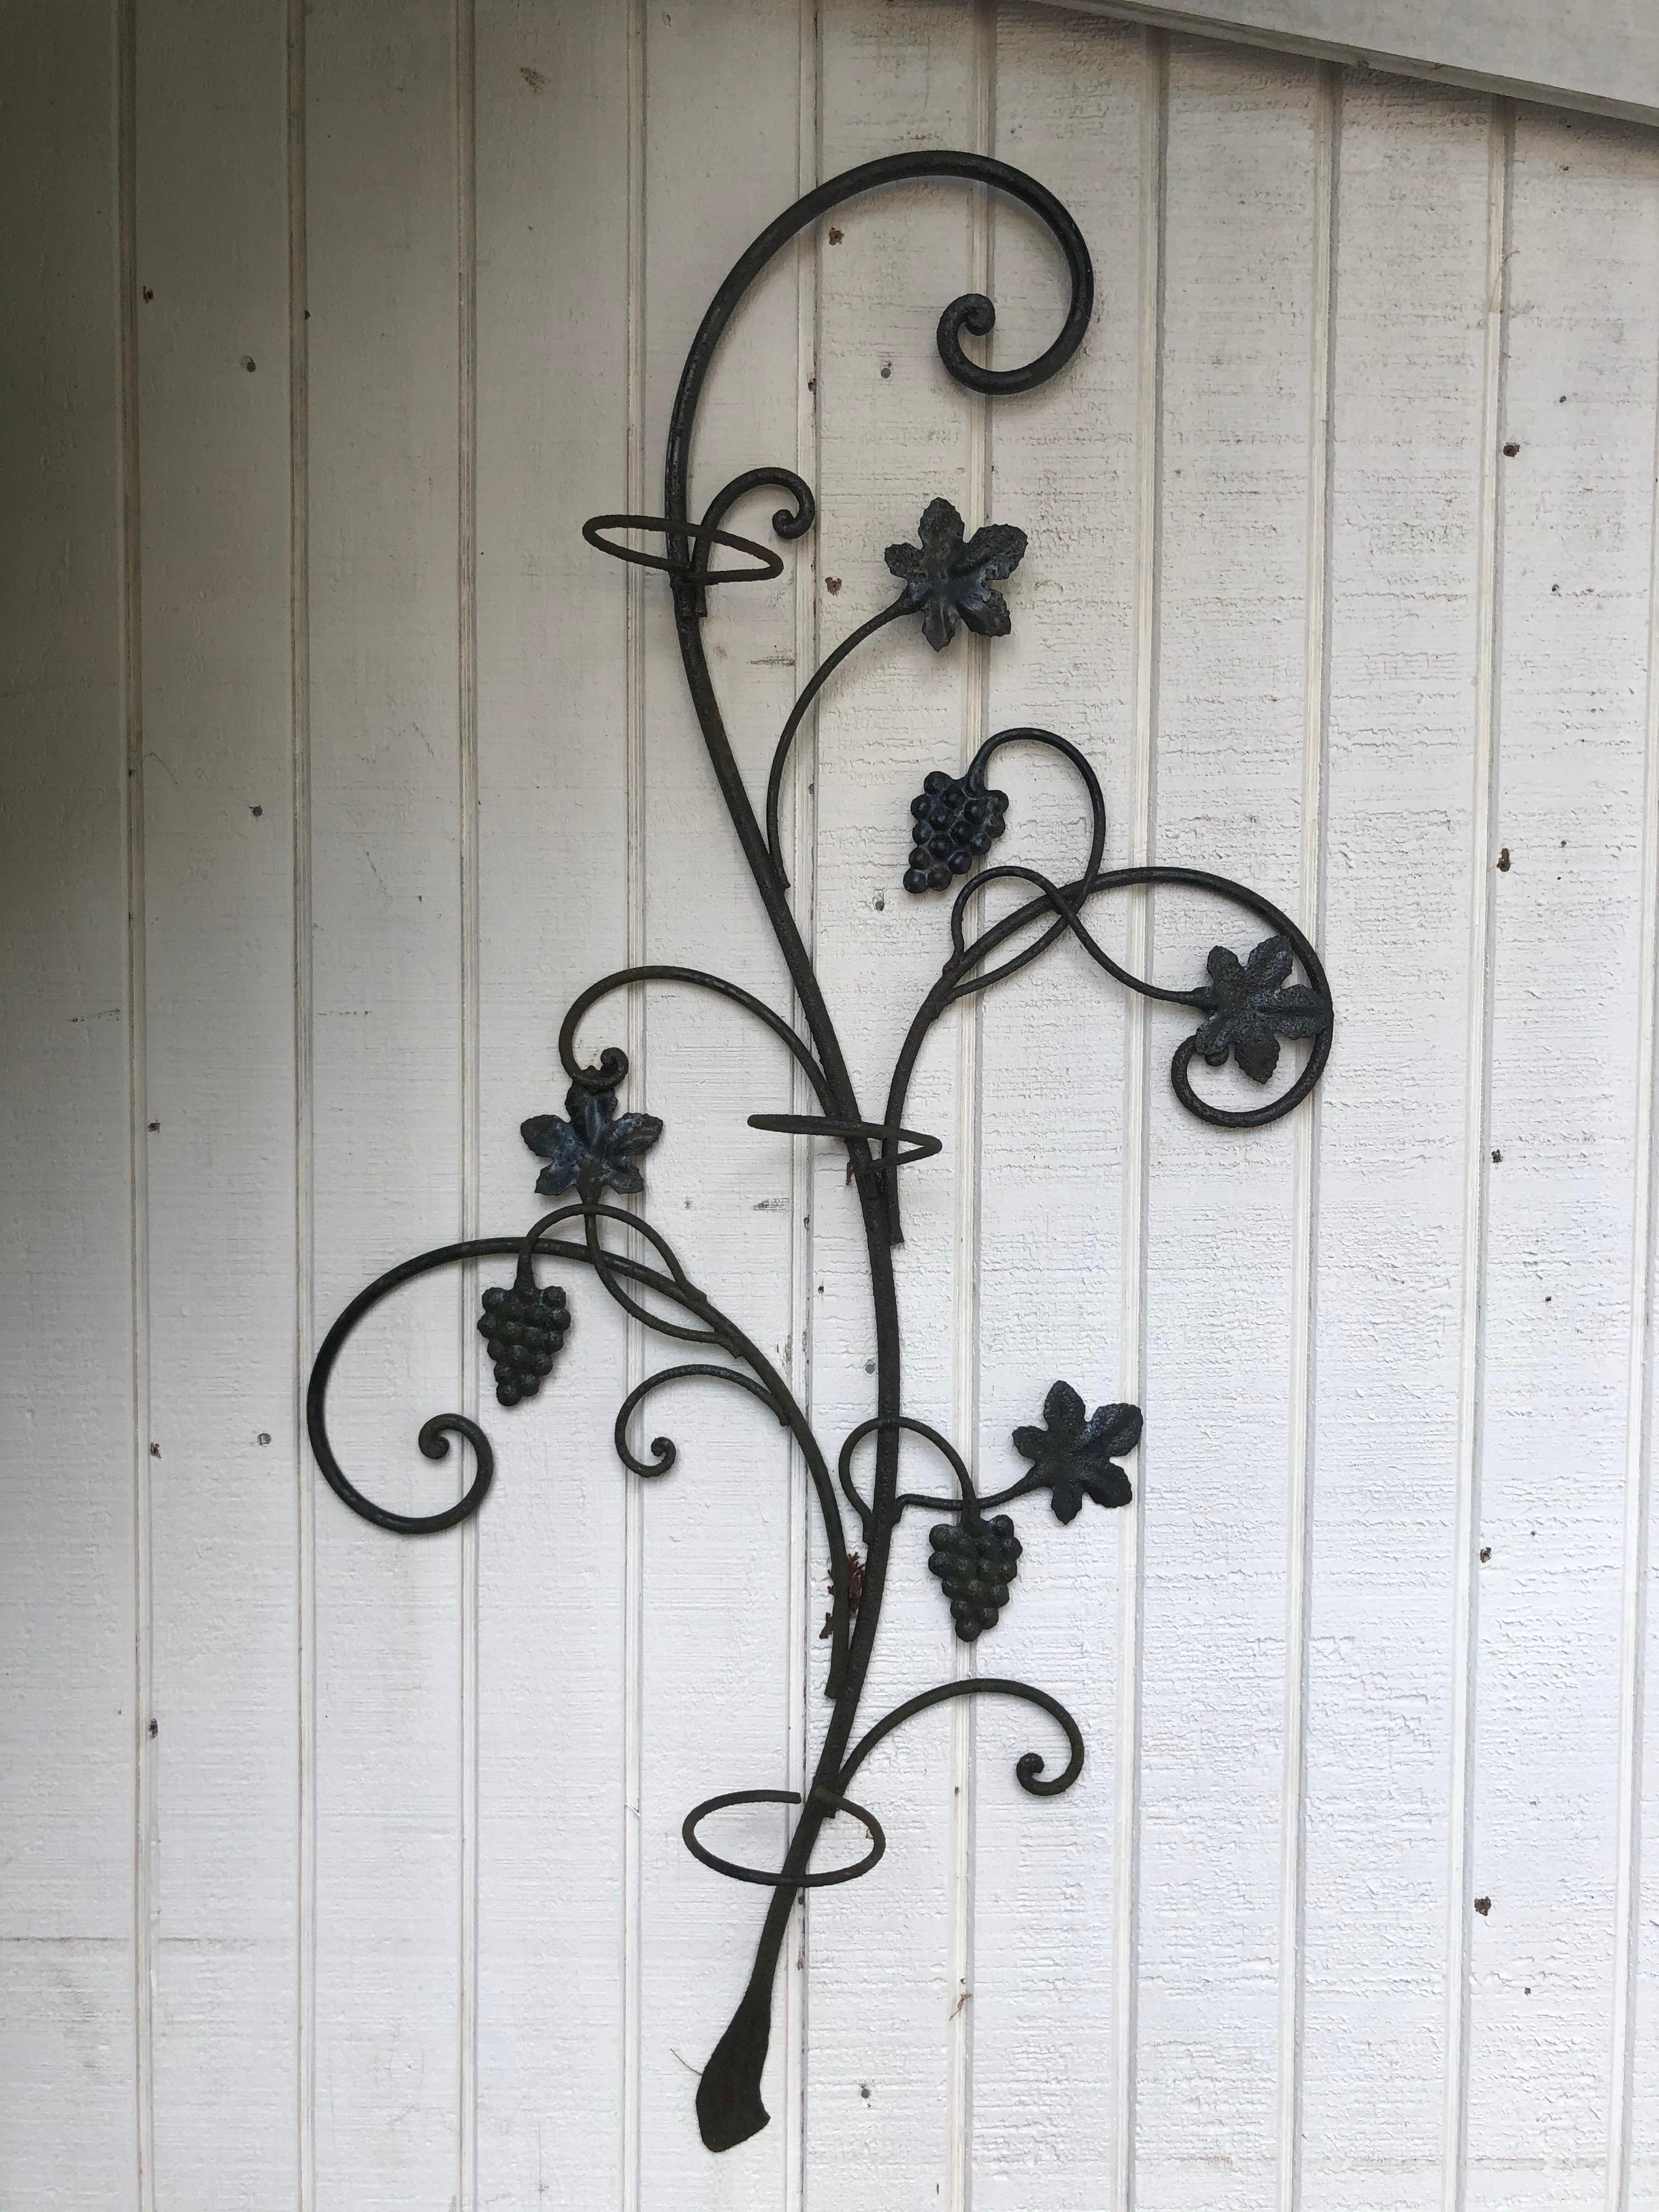 Wrought iron floral garden wall decor. Whimiscal with leaves and grapes for three potted plants.
6 inch diamater opening. Fun farm and country wall decor. Use in or outside.